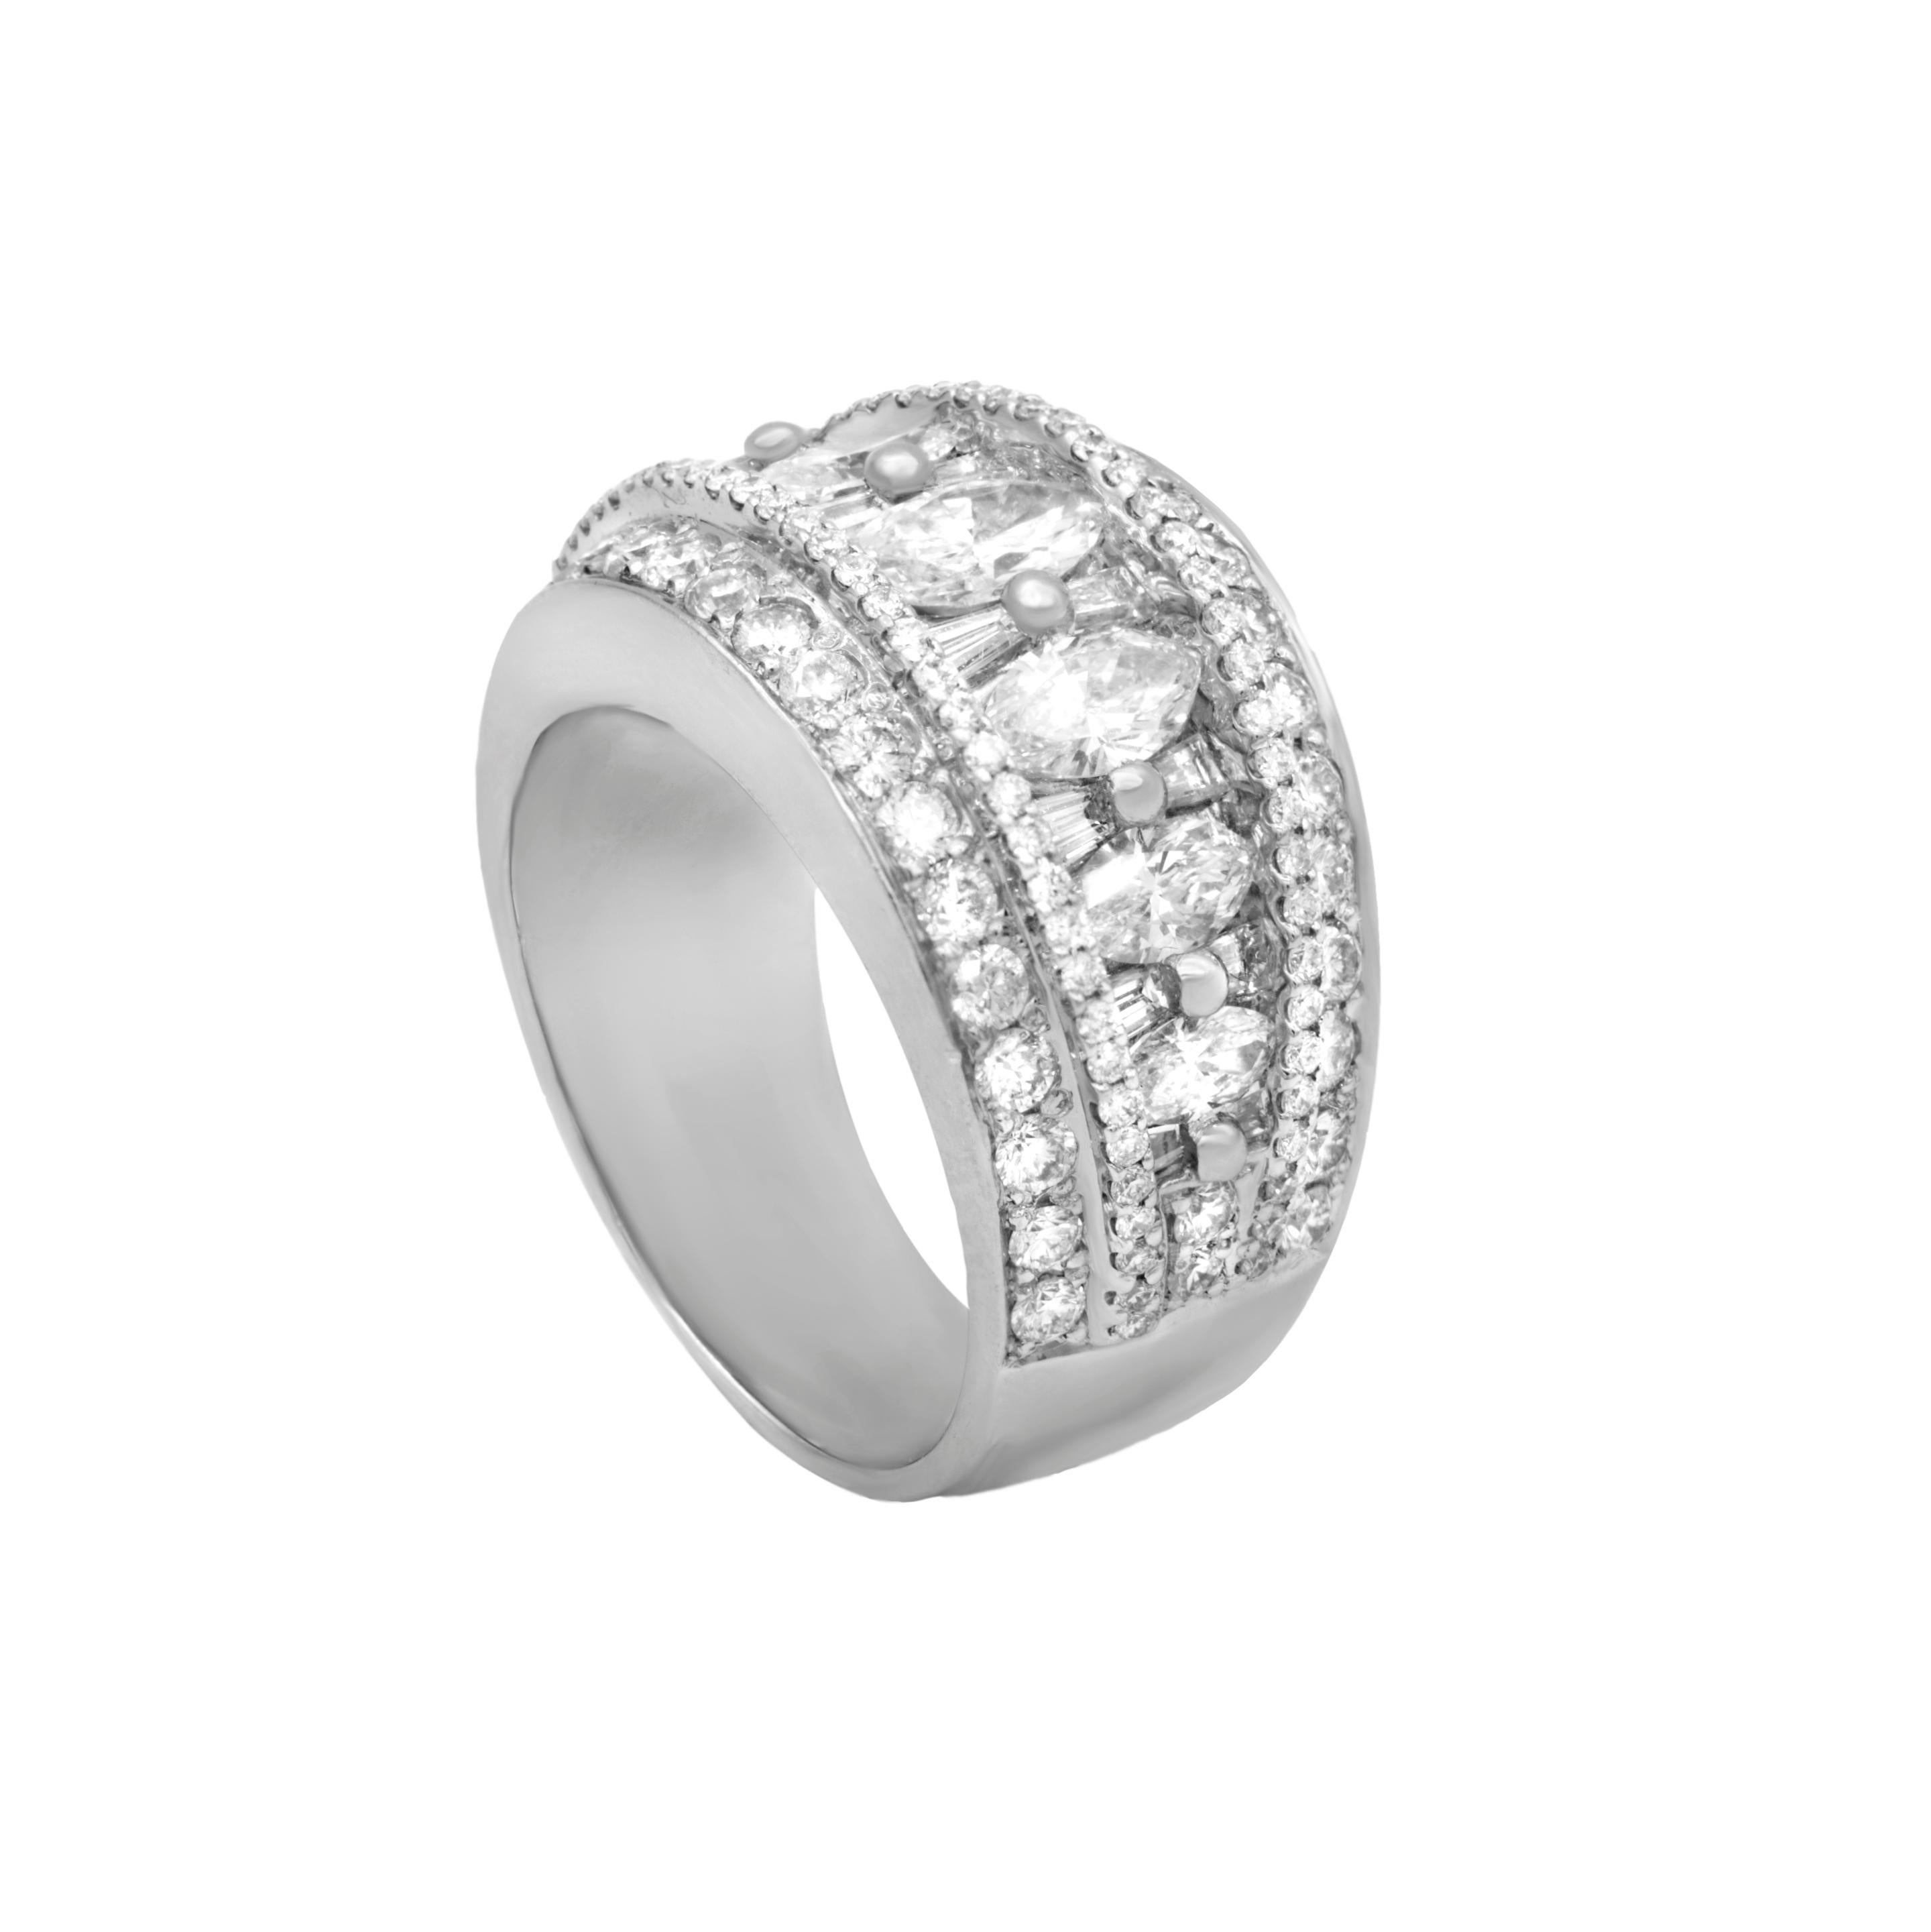 Platinum Multi row diamond ring, with marquise center row. 
4.50 Carats of Marquise, baguette and round brilliant cut diamonds. 

This product comes with a certificate of appraisal
This product will be packaged in a custom box 

Color 
White